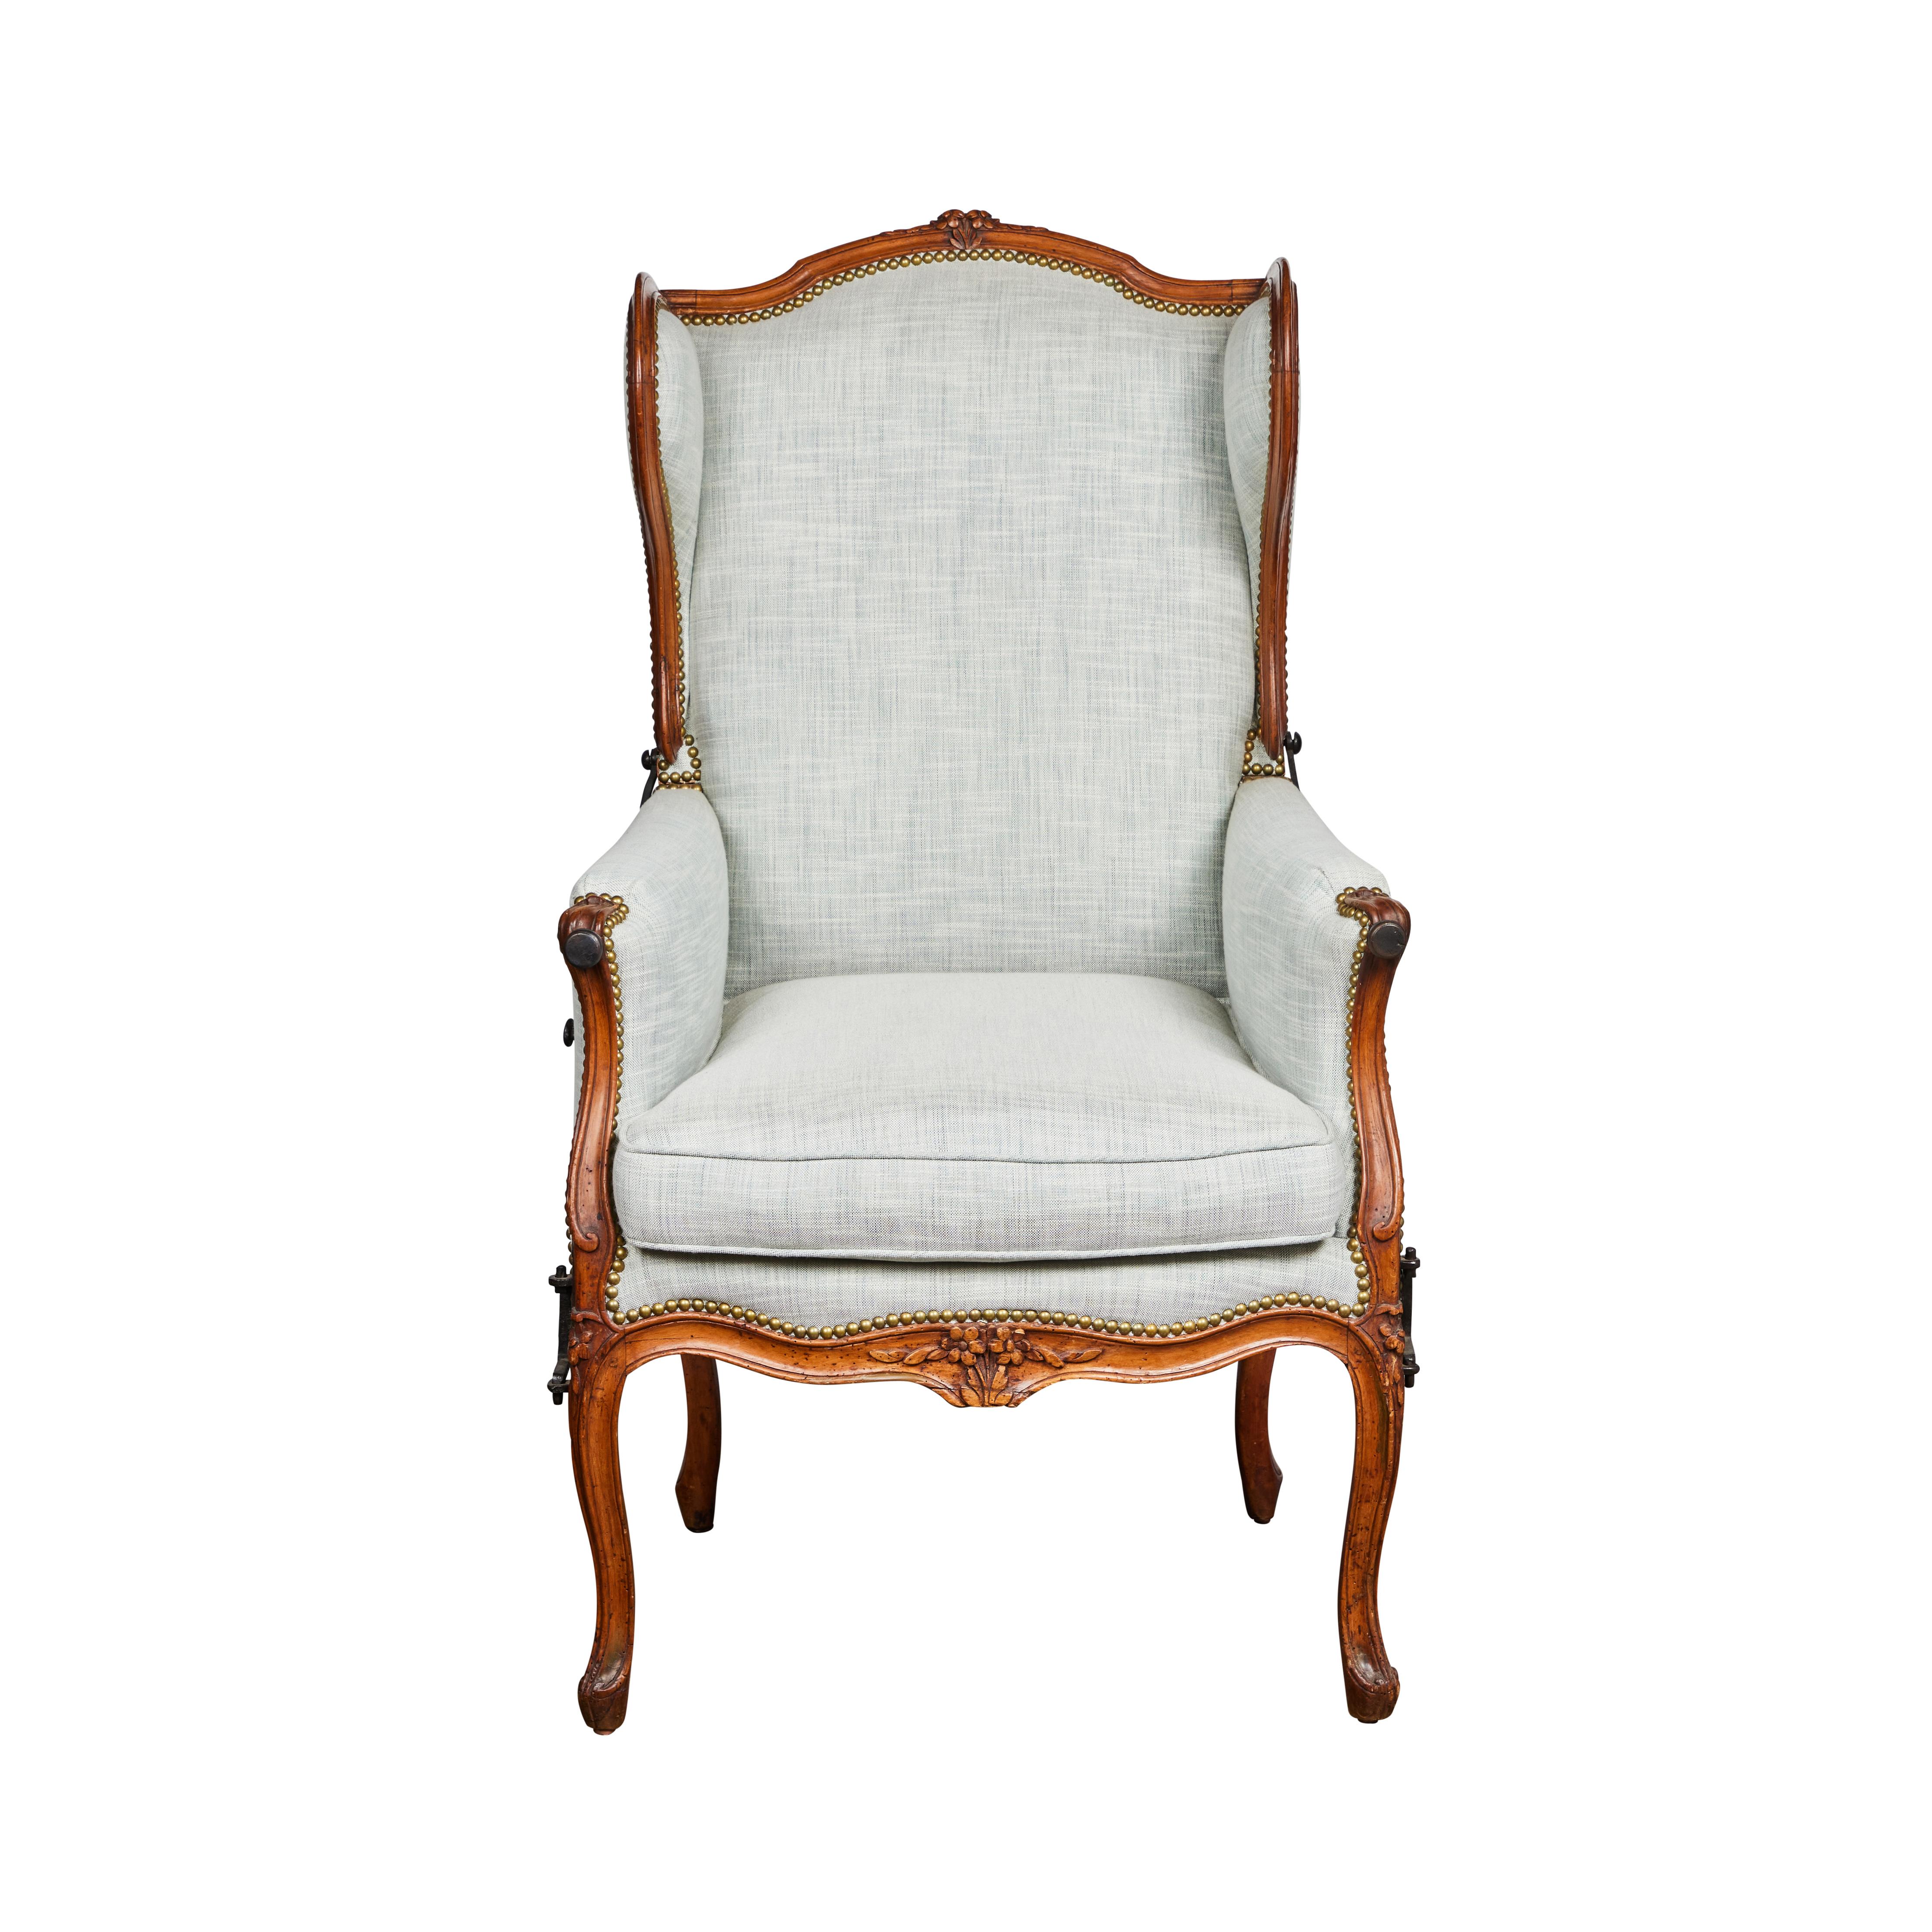 Hand carved Beechwood, winged back, reclining ratchet chair with original iron mounts. Newly upholstered in woven fabric.  